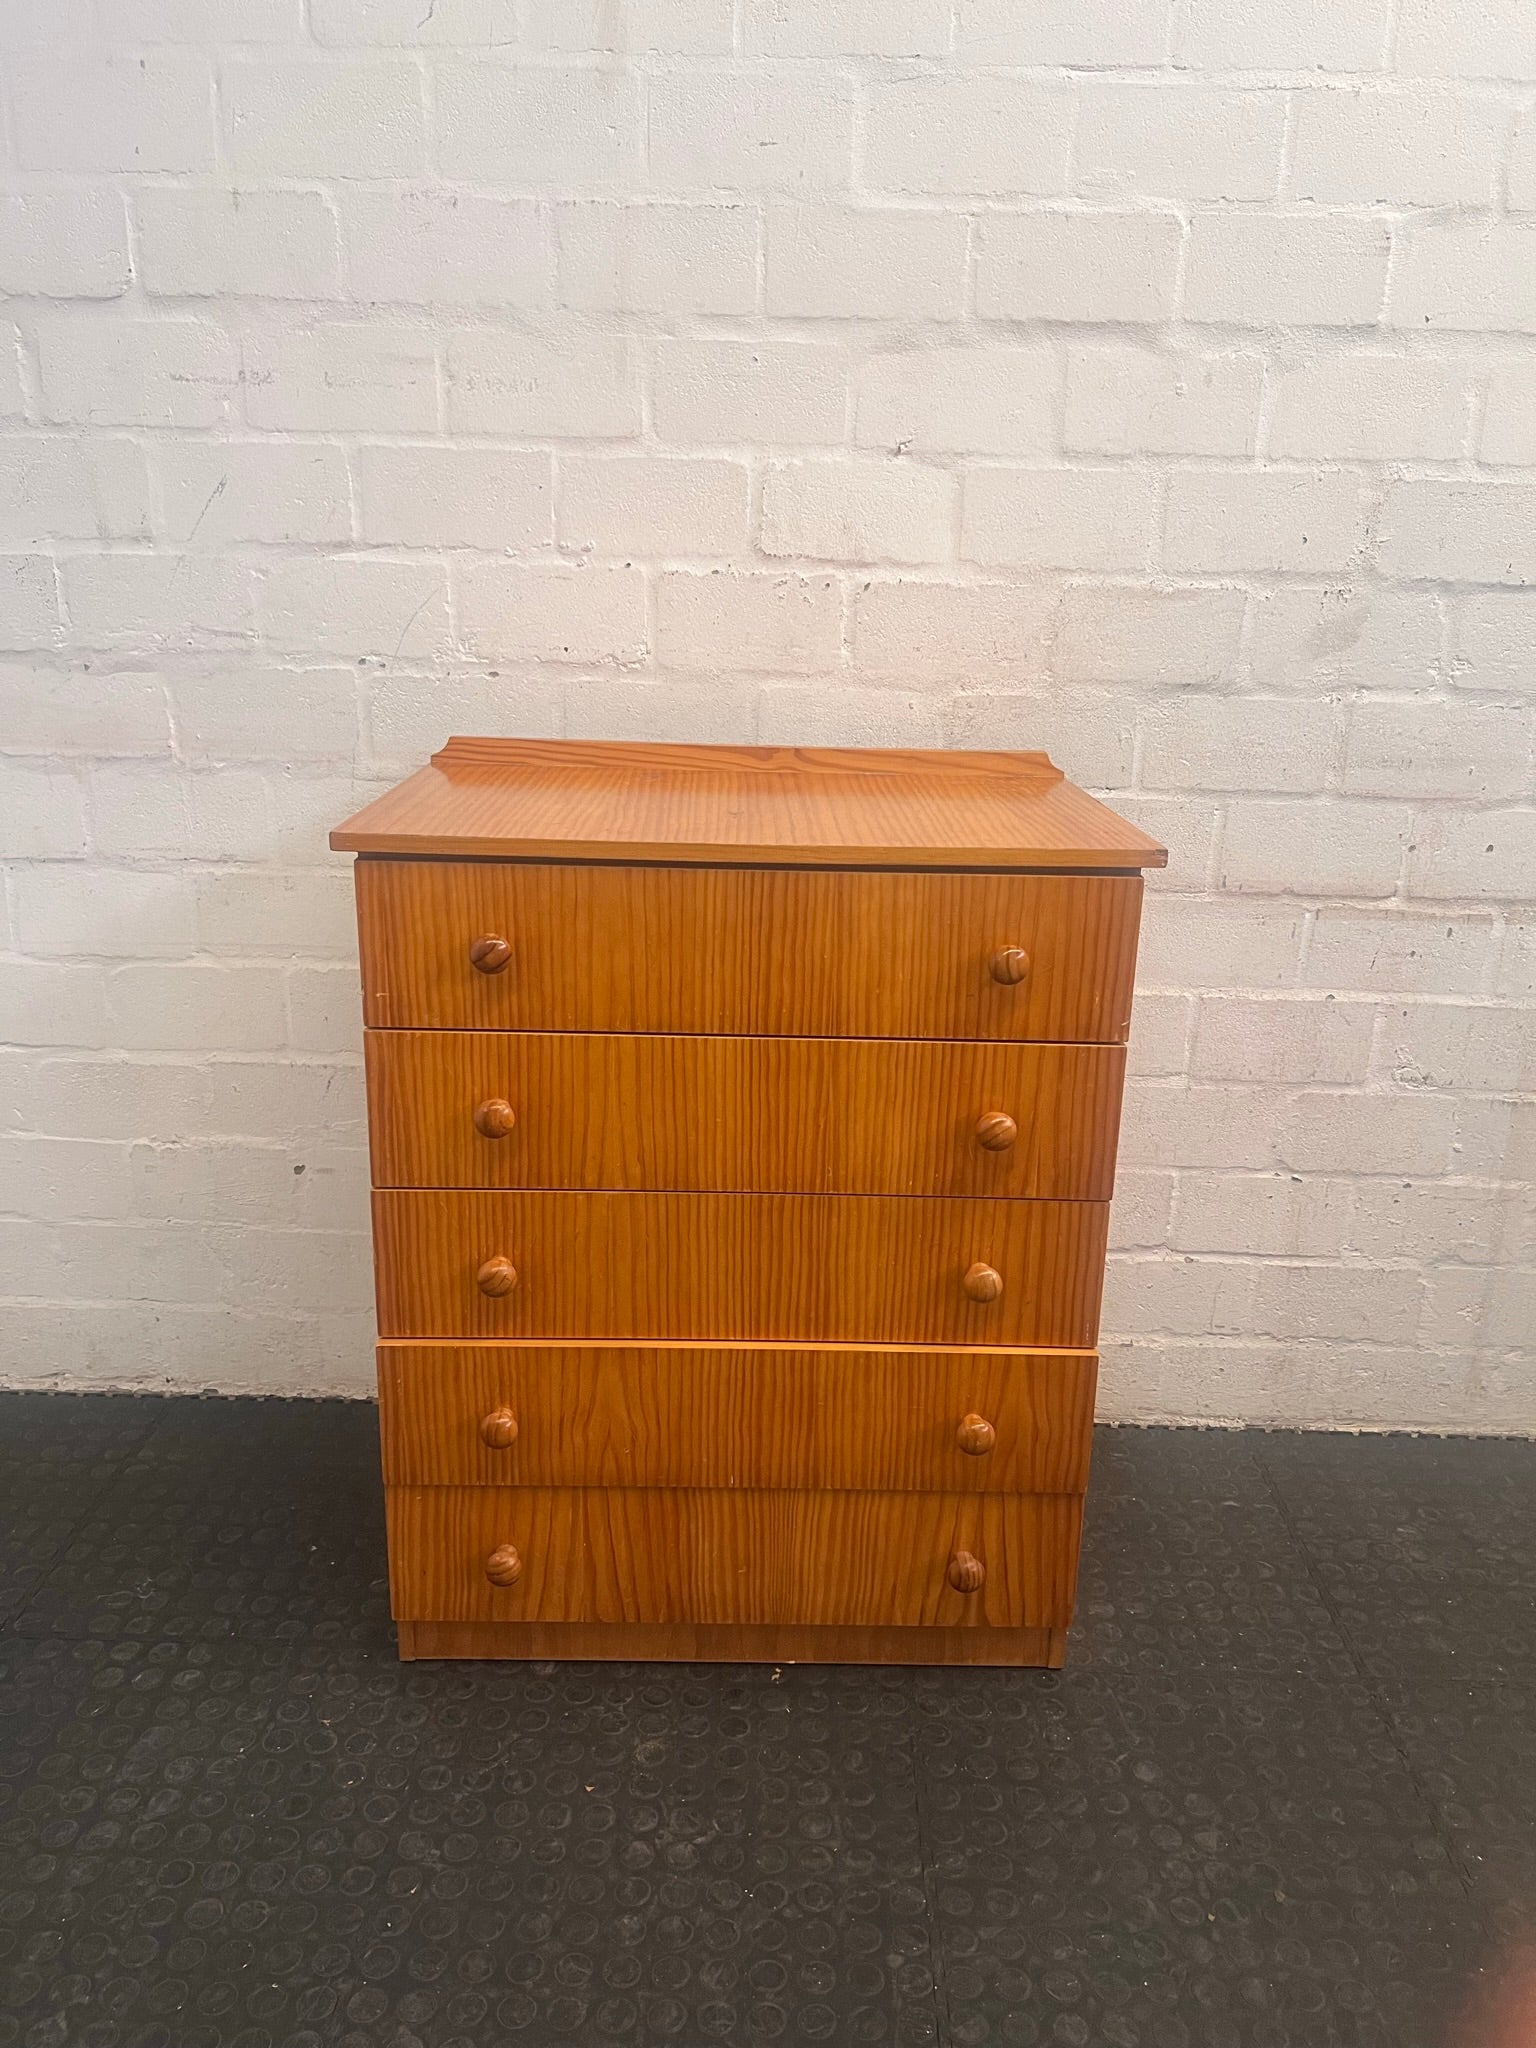 Wooden Five Drawer Doubled Handle Chest of Drawers - REDUCED